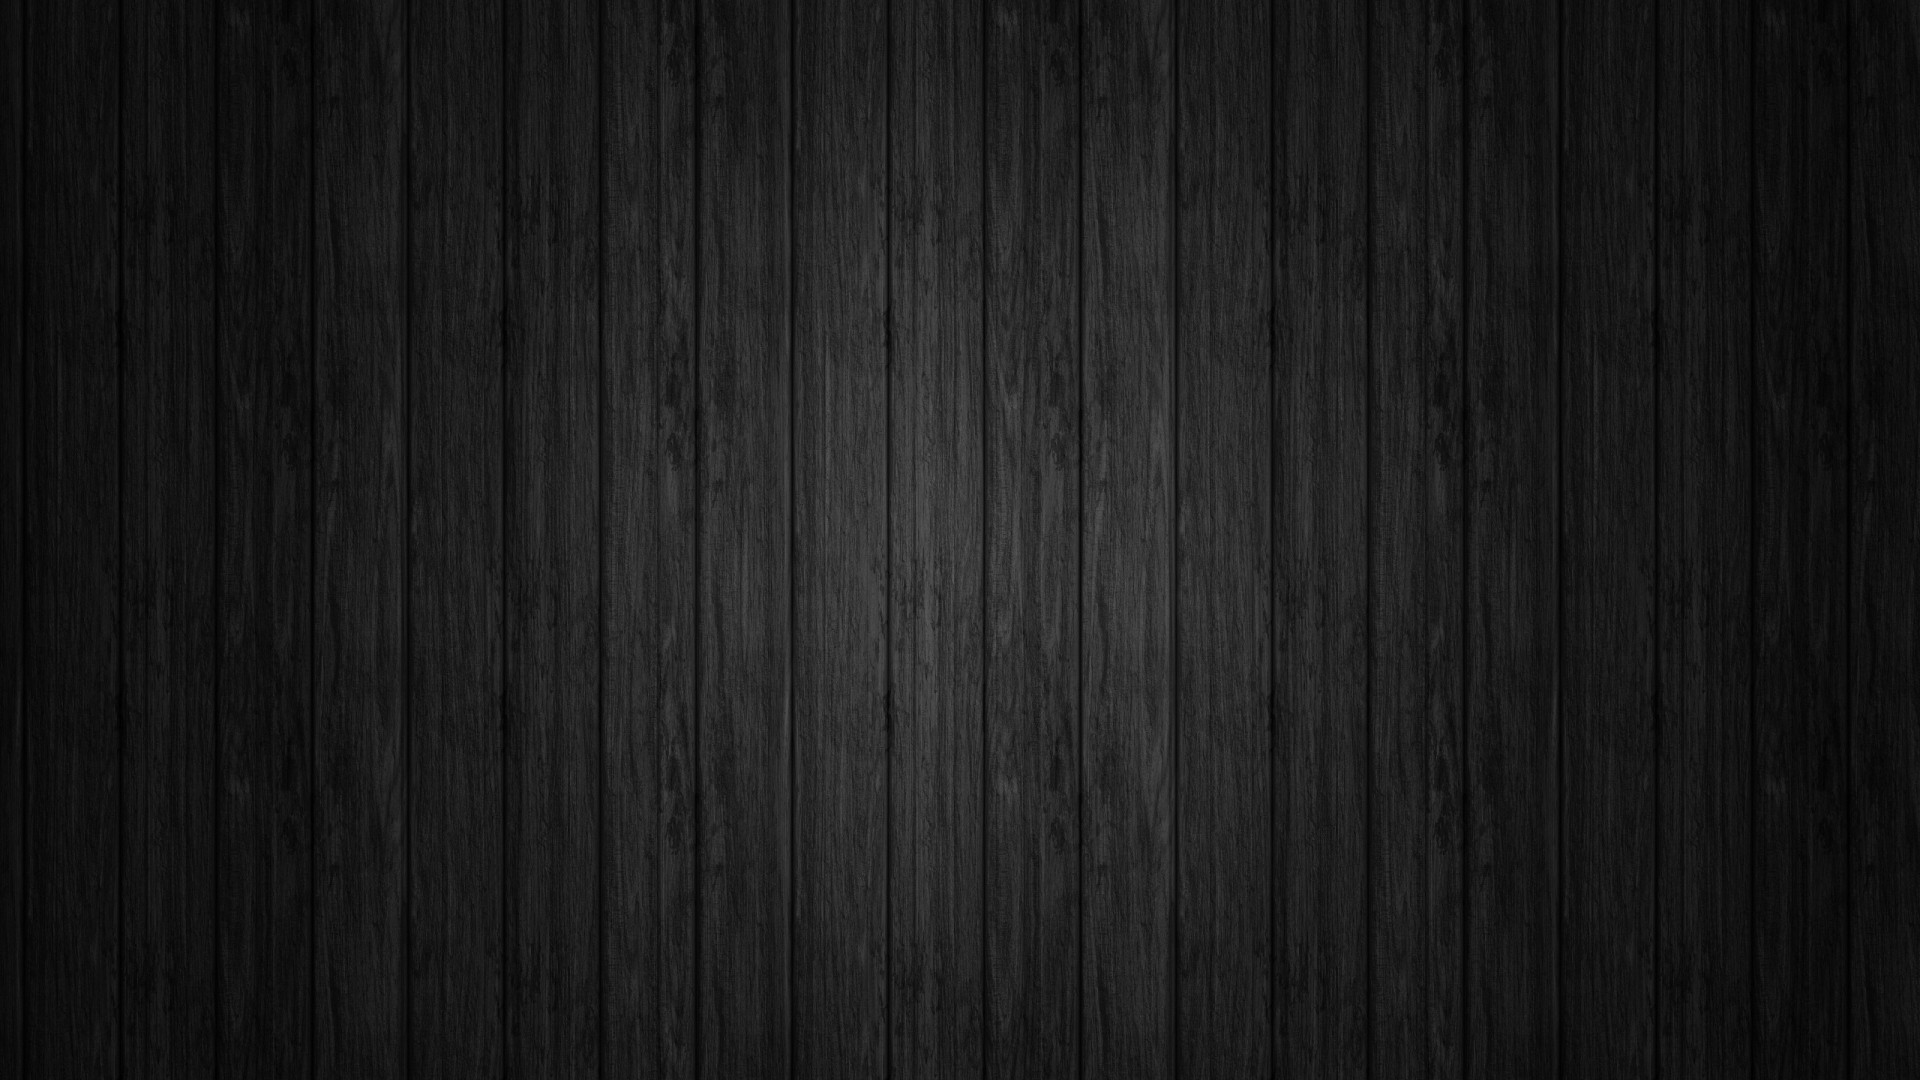 General 1920x1080 dark wood texture wooden surface lines planks